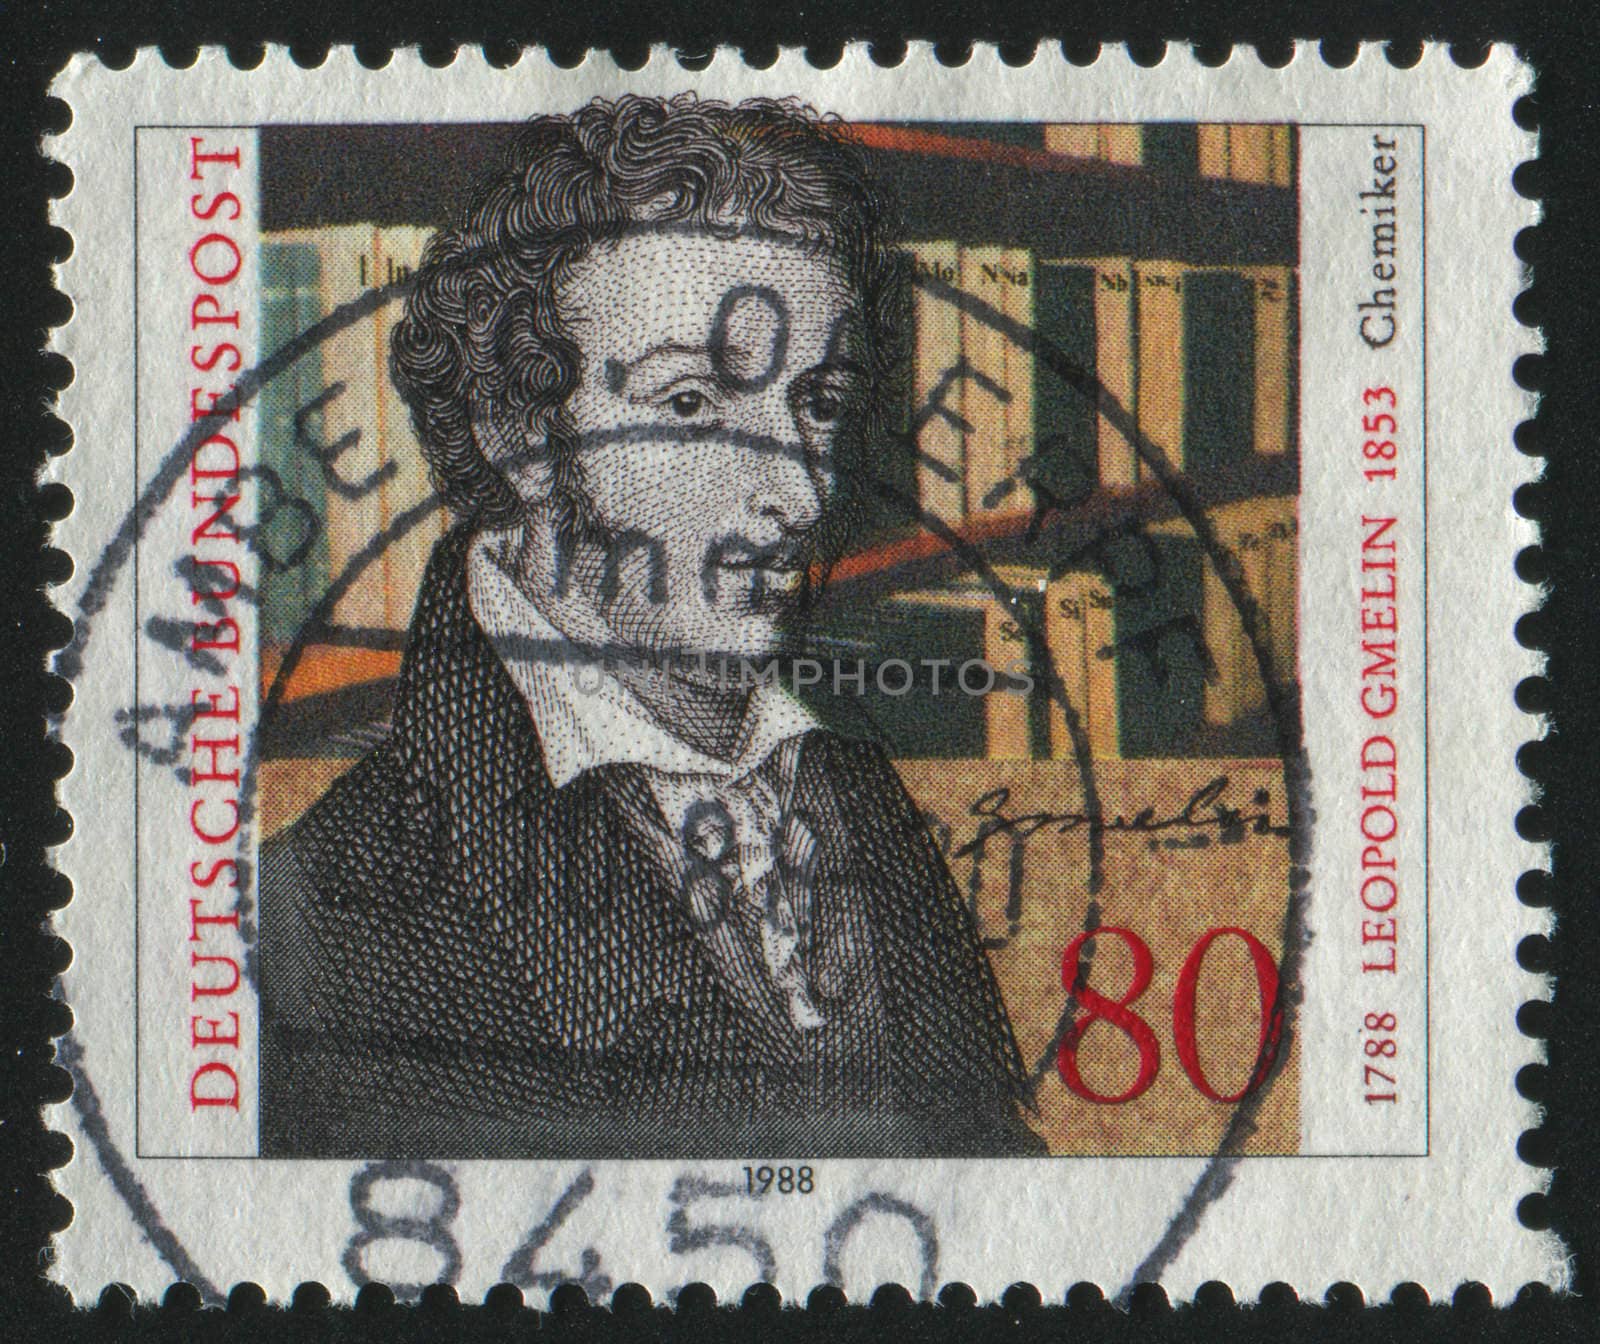 GERMANY  - CIRCA 1988: stamp printed by Germany, shows portrait Leopold Gmelin, circa 1988.